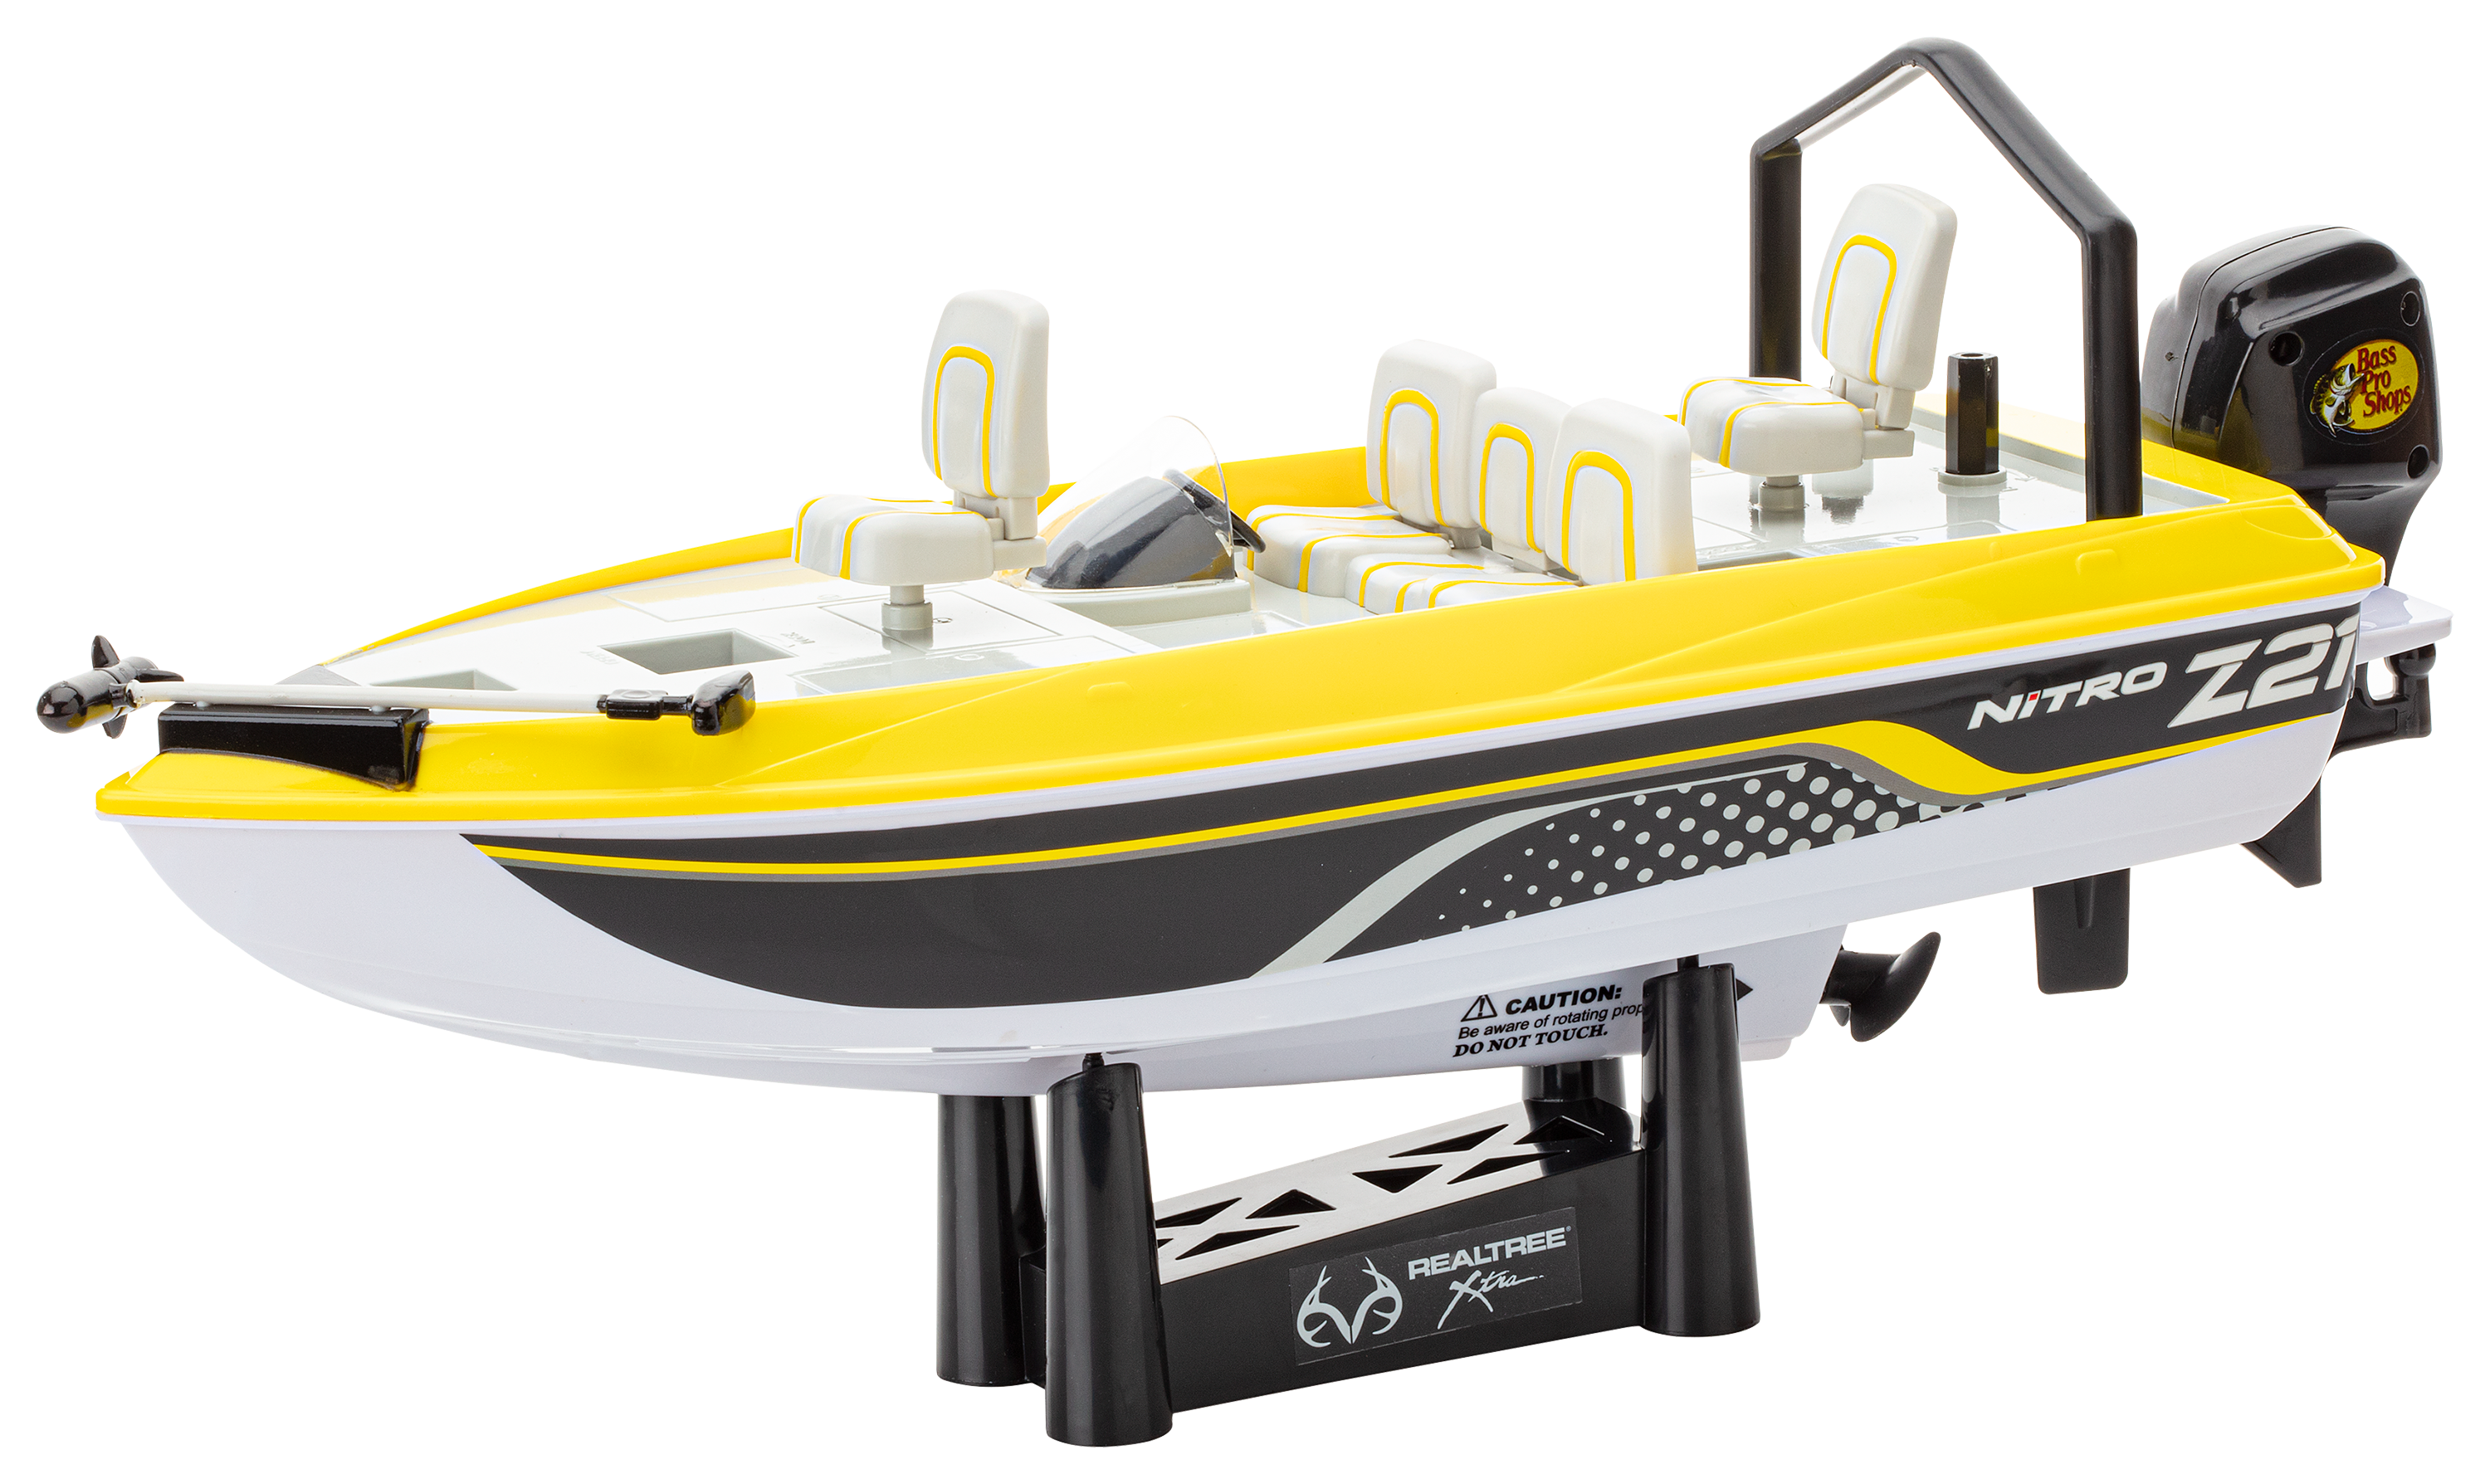 Buy Bass Pro 30 Remote Control Fishing Boat Online at